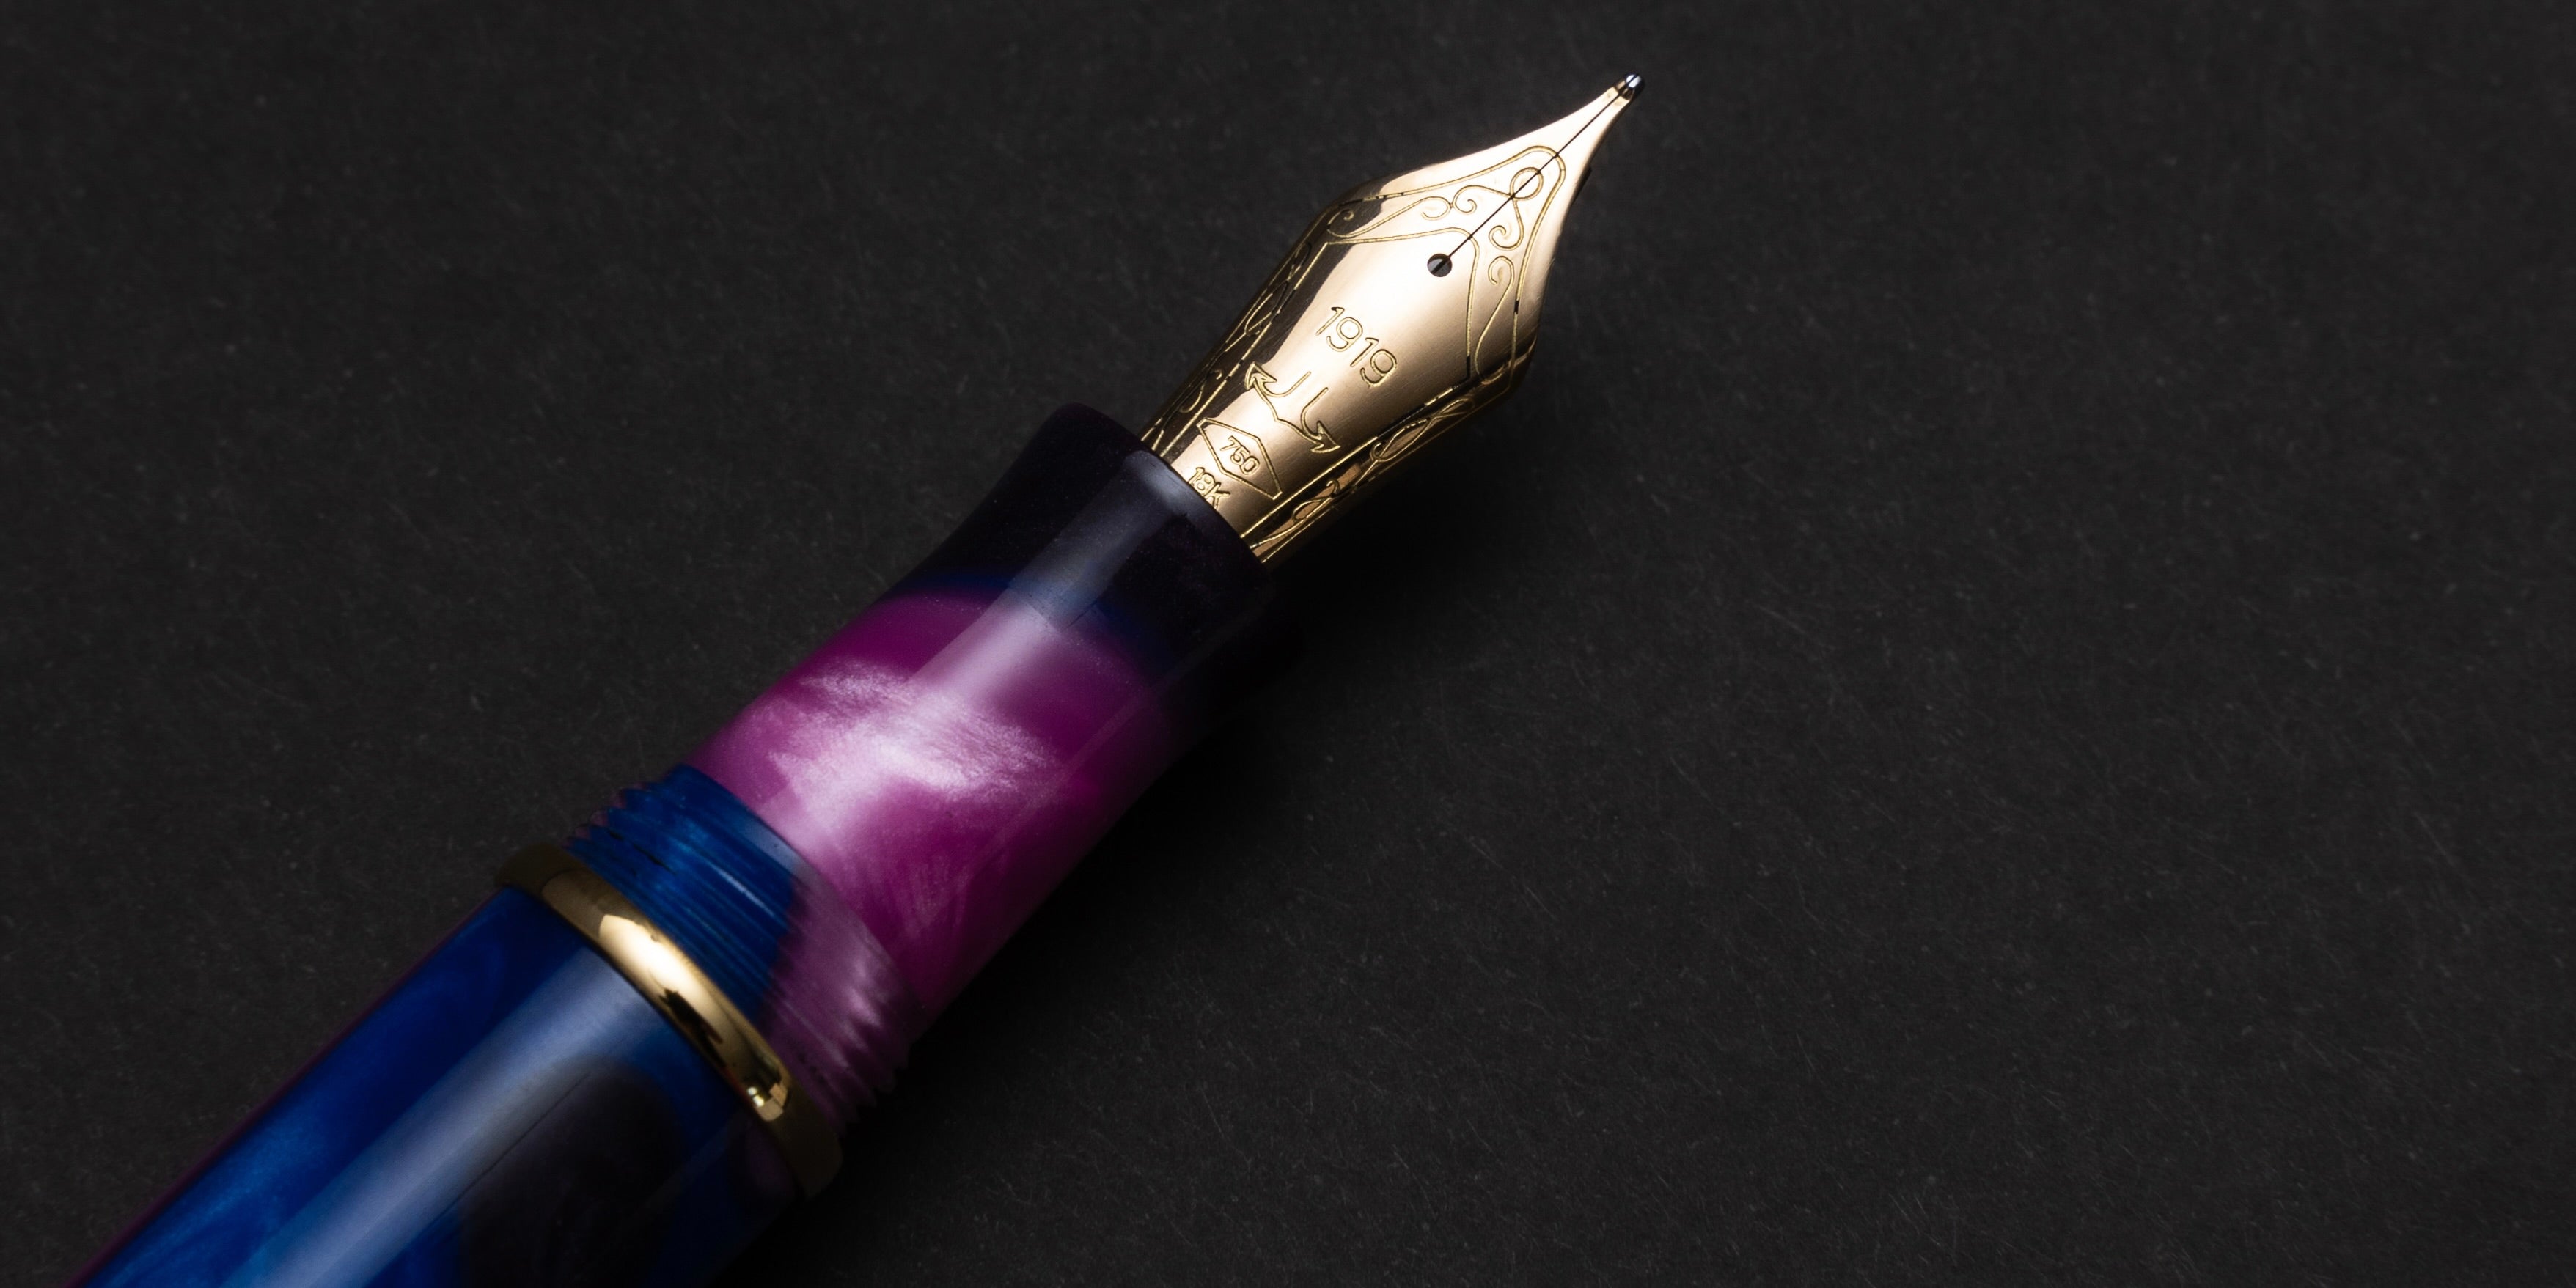 The Ultimate Guide to Choosing Your First Fountain Pen